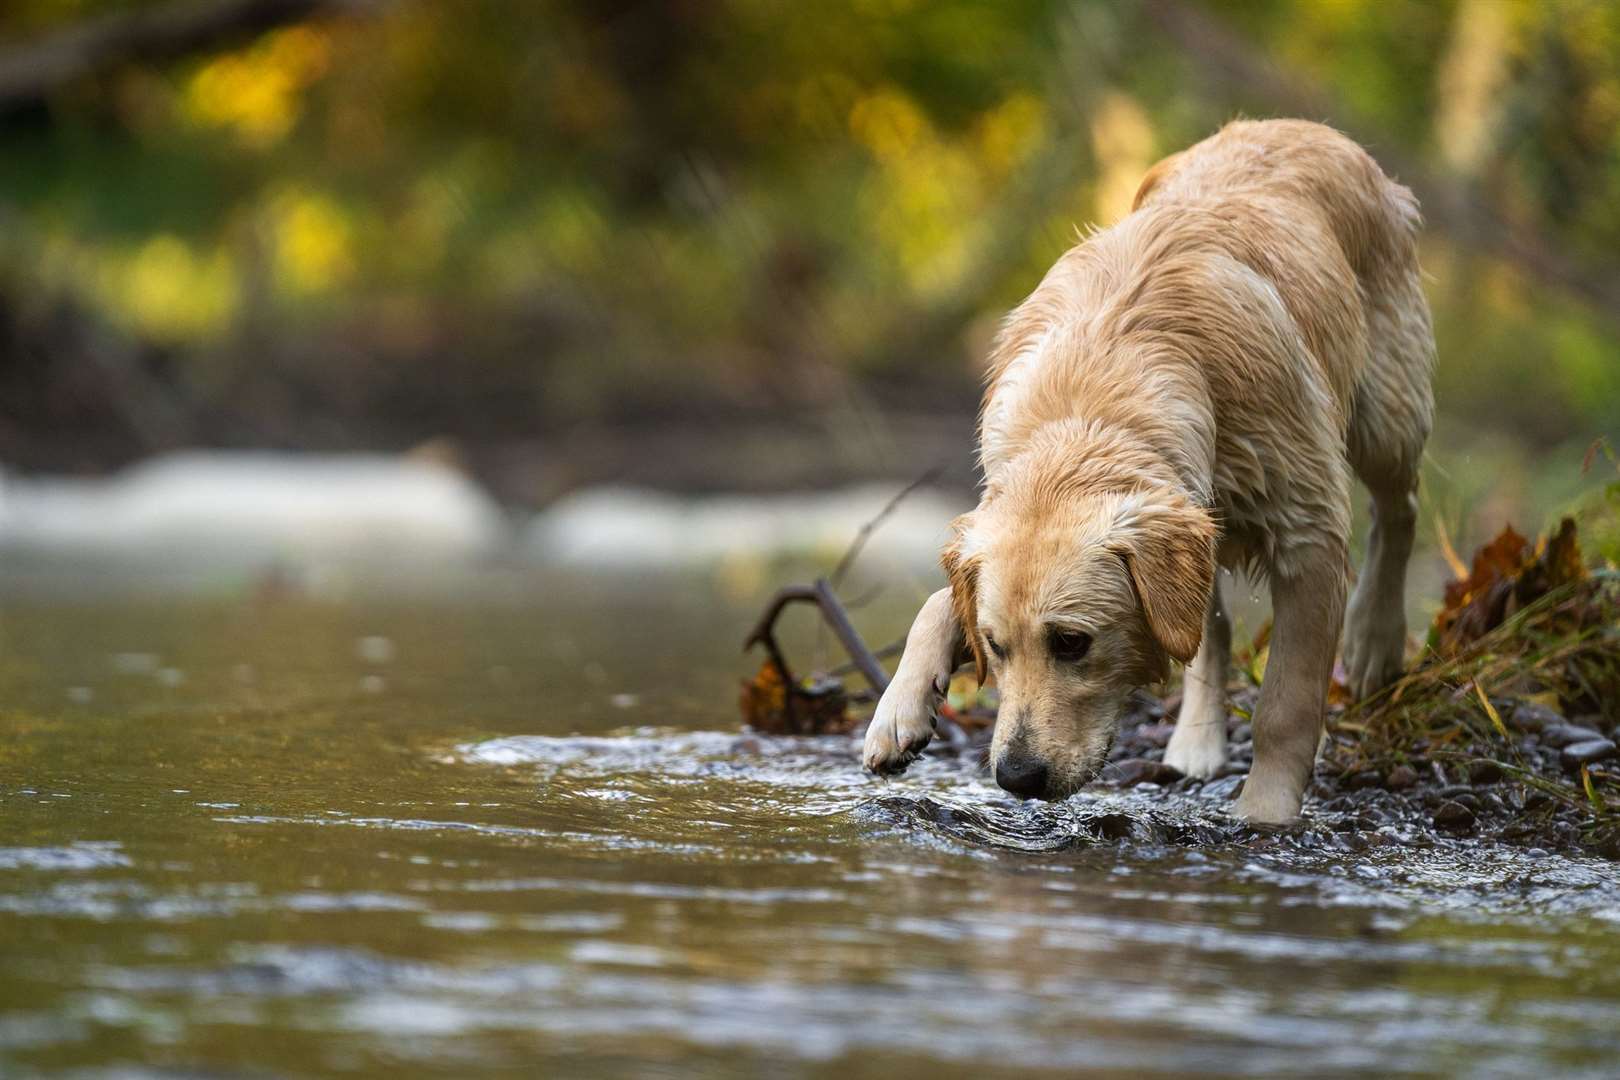 Owners should avoid letting their animals drink from the water as cases peak in July and August. Picture: iStock.